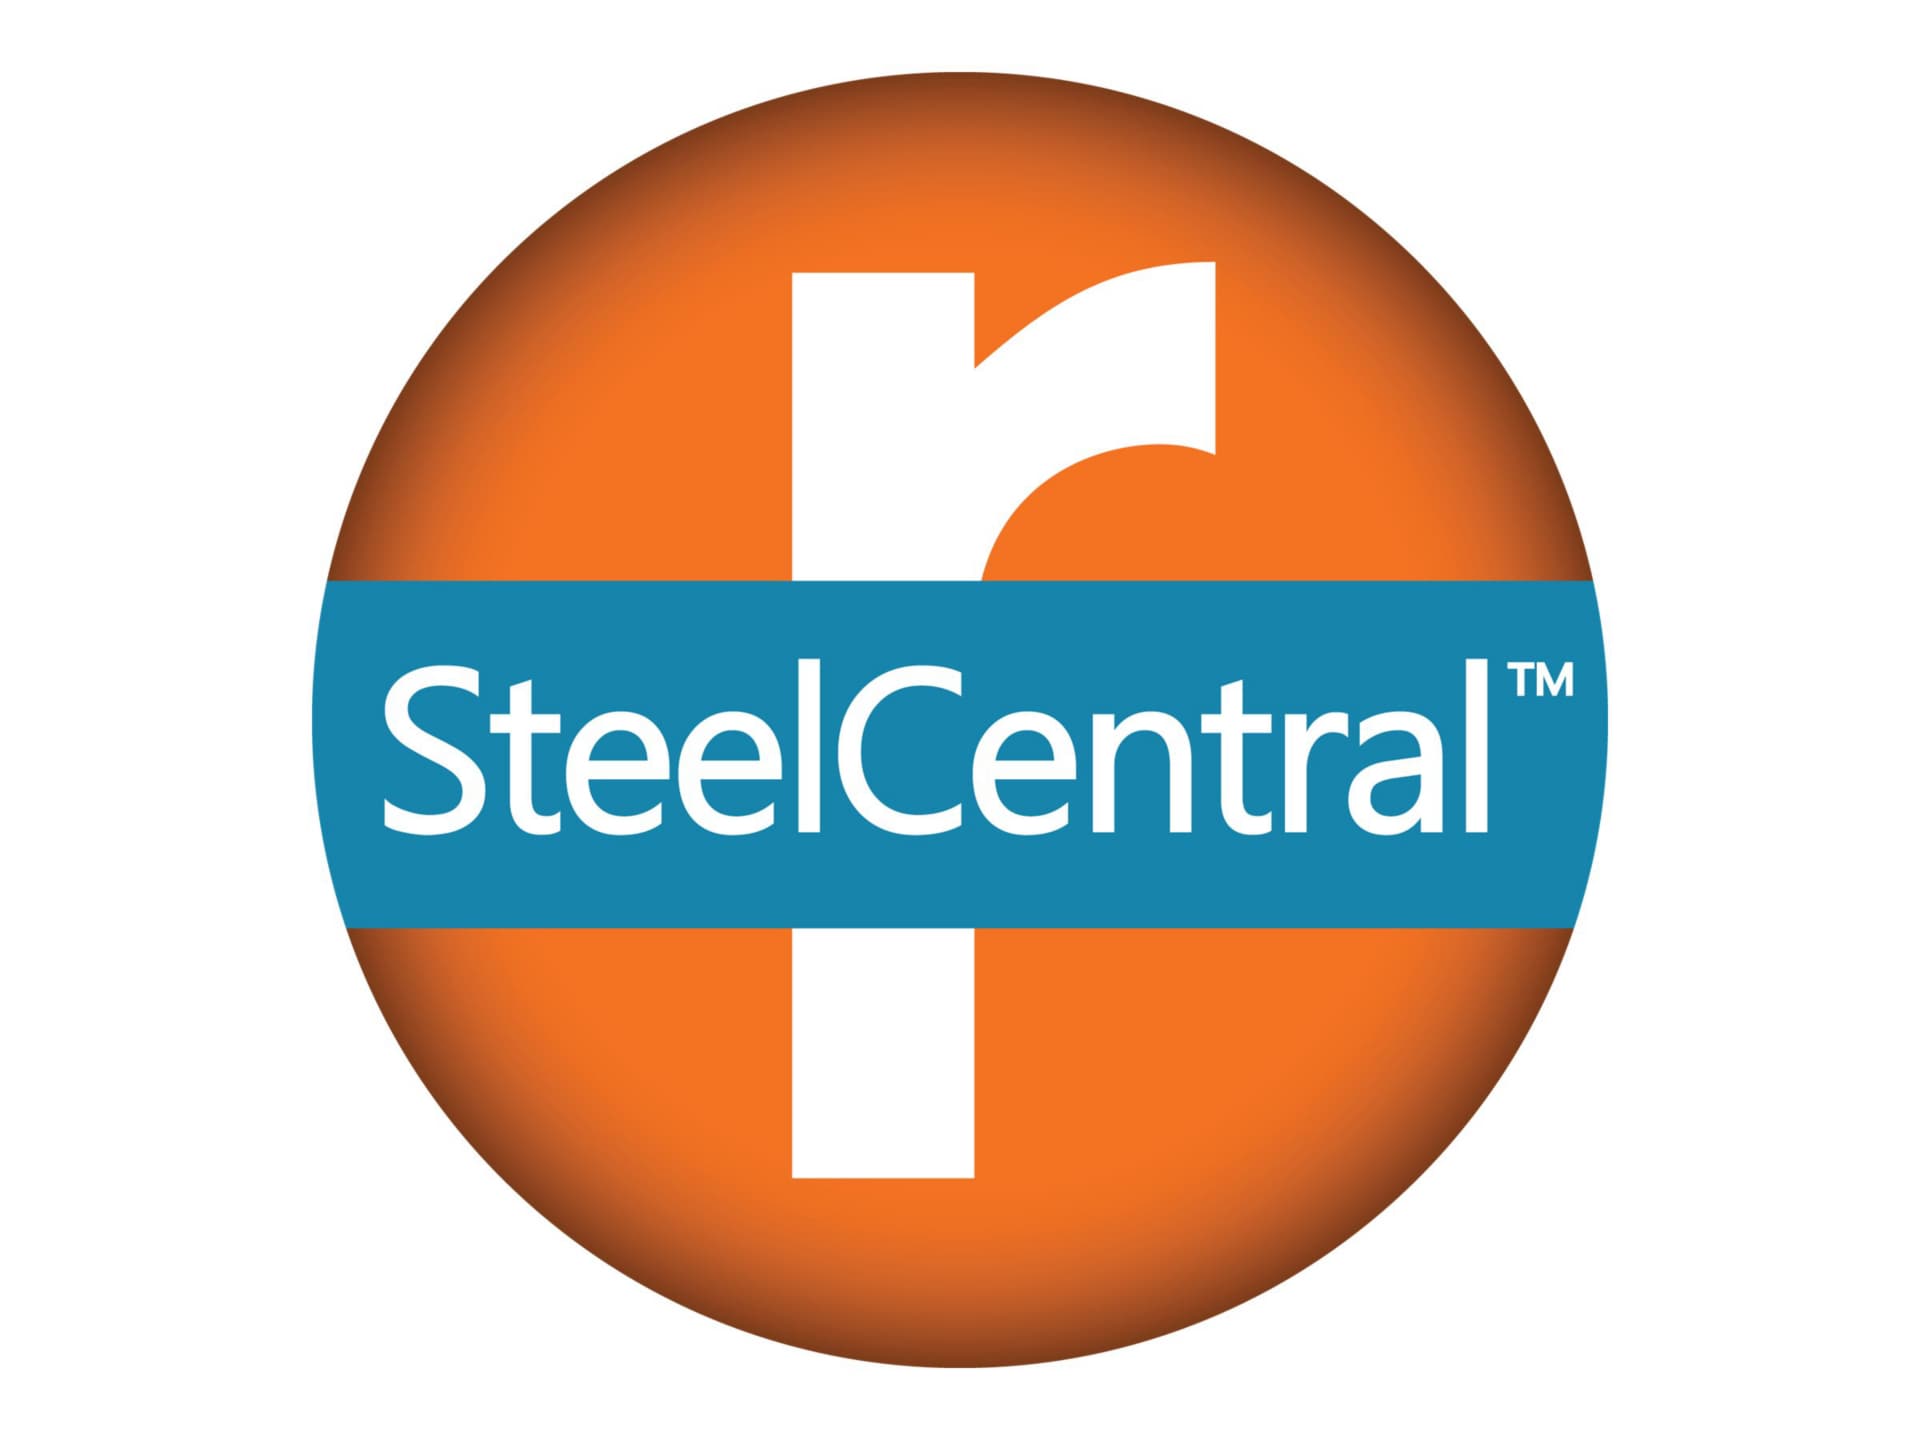 SteelCentral NetProfiler 4280 - subscription license (1 month) + Gold Support - 100000 flows per minute